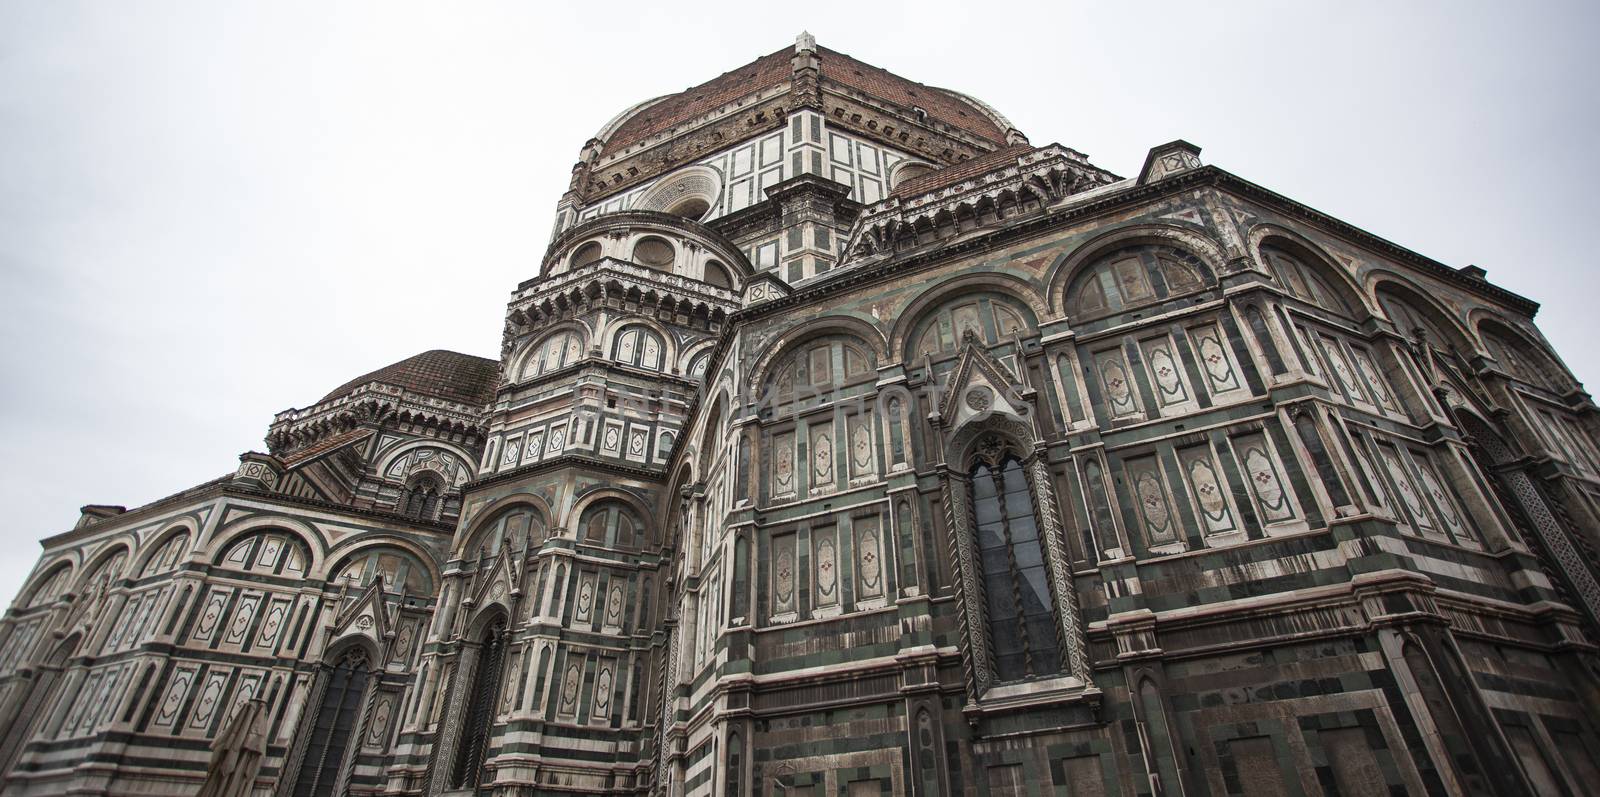 Detail of the Cathedral of Florence by pippocarlot